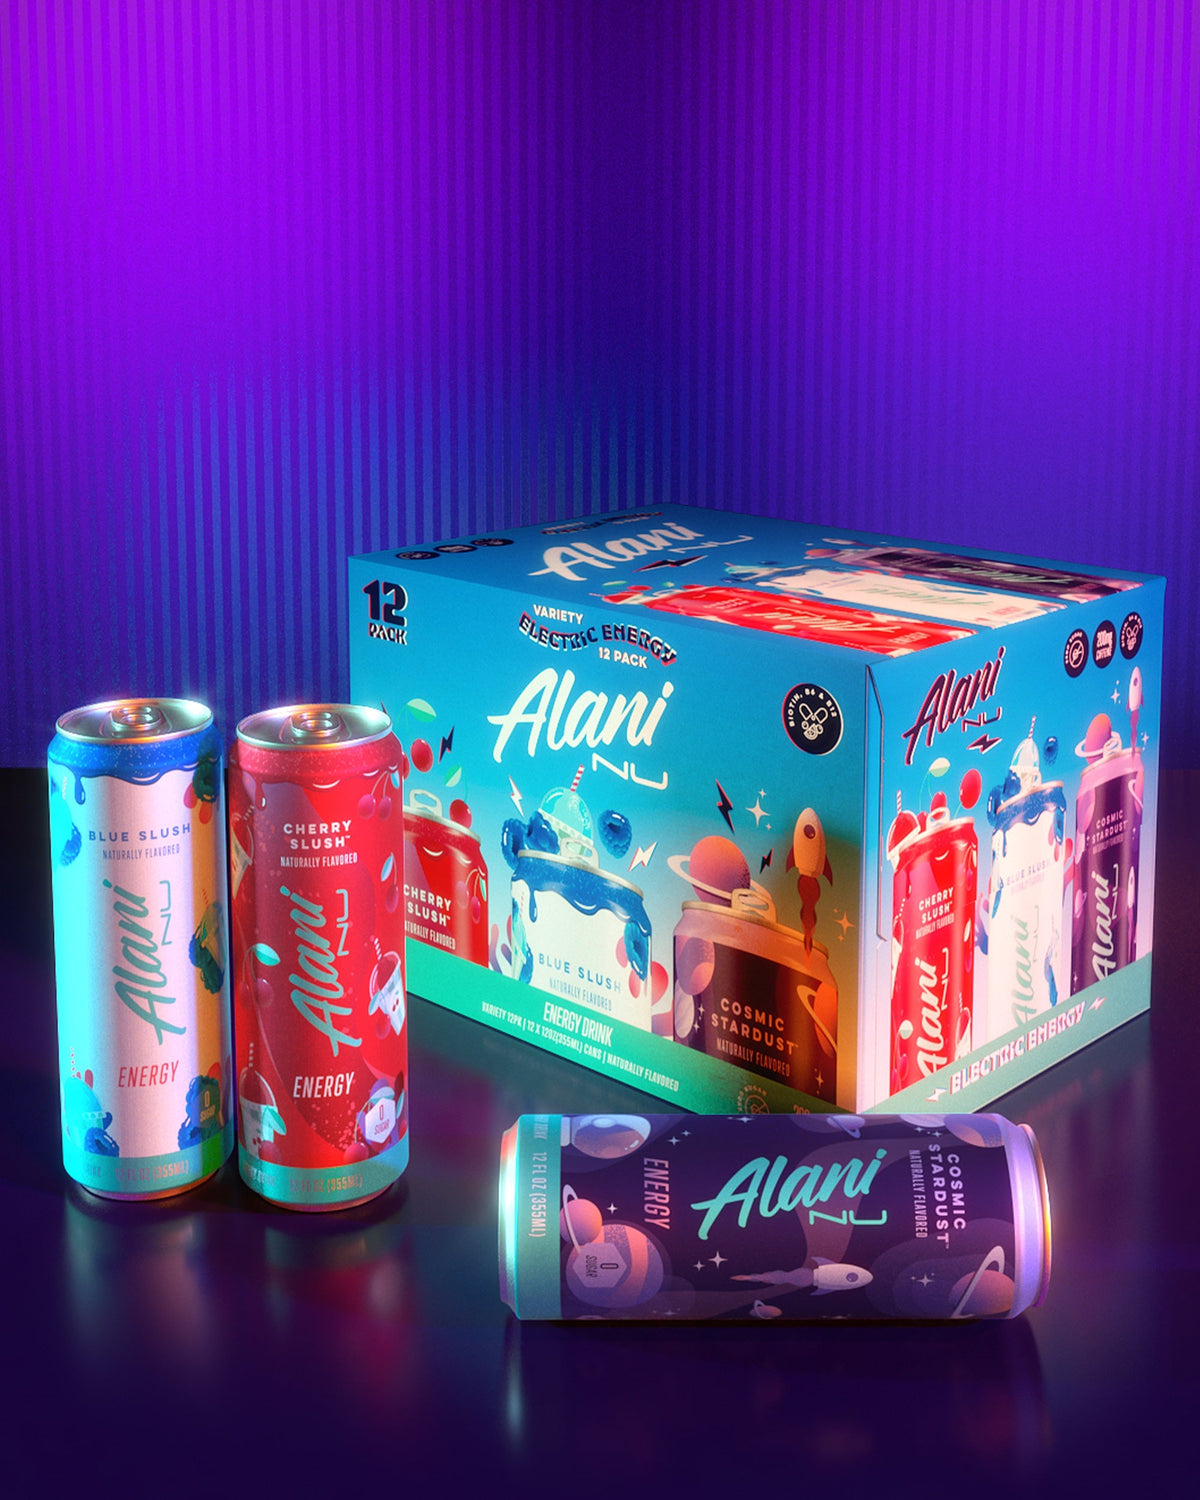 A group of three cans and a 12pk box of Alani Nu Electric Energy sitting on top of a table.